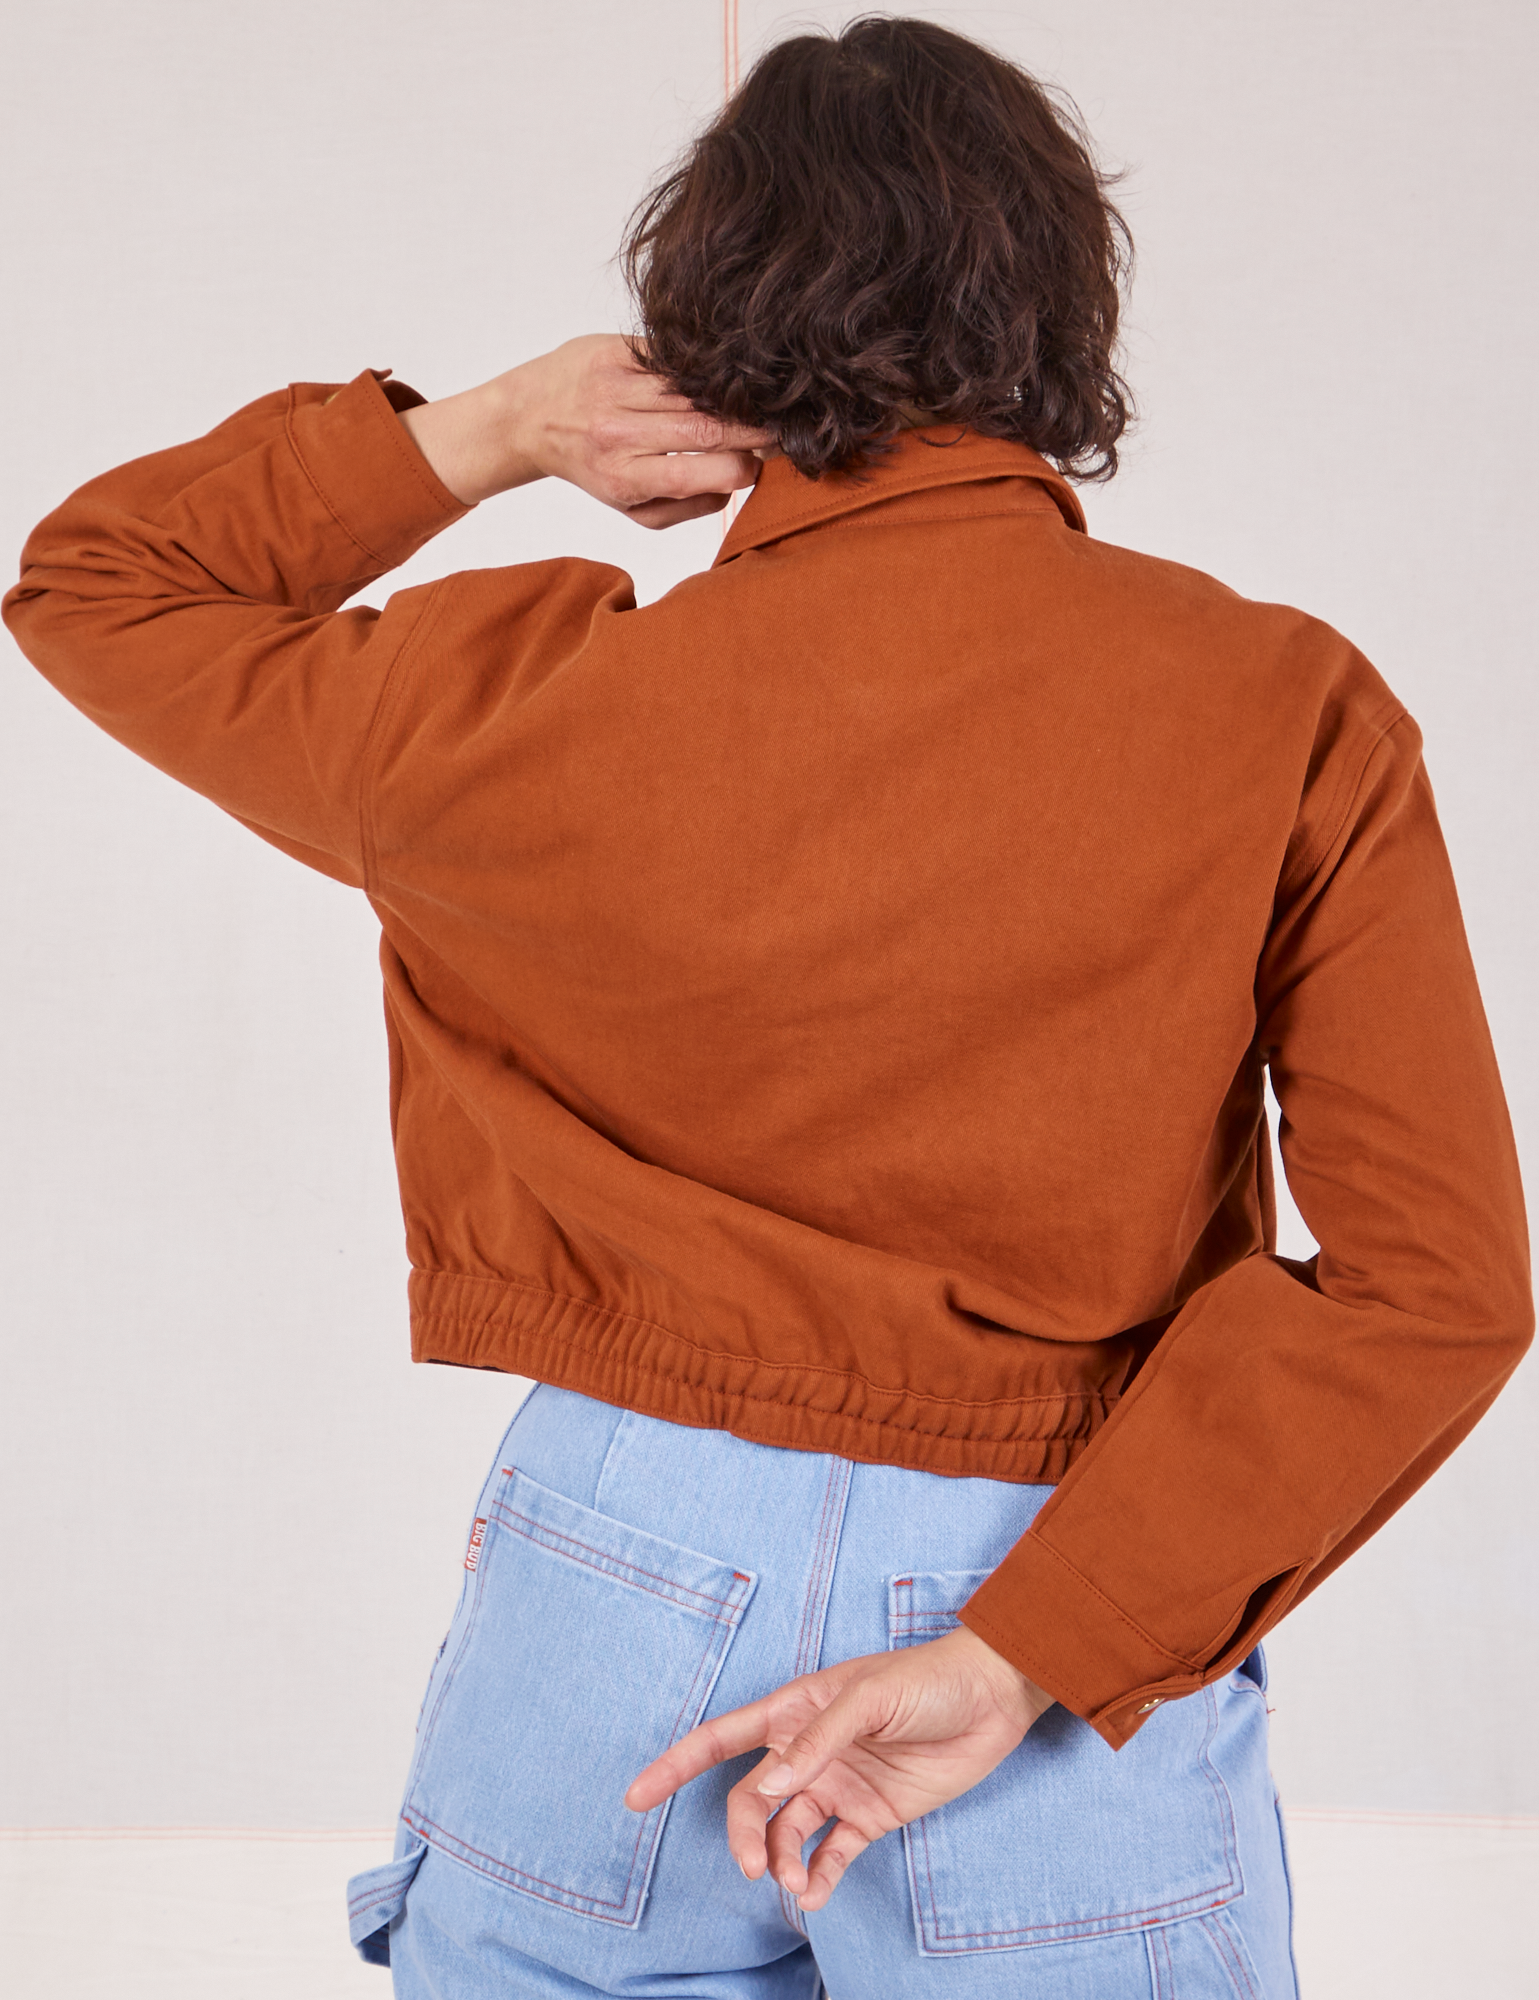 Ricky Jacket in Burnt Terracotta back view on Tiara